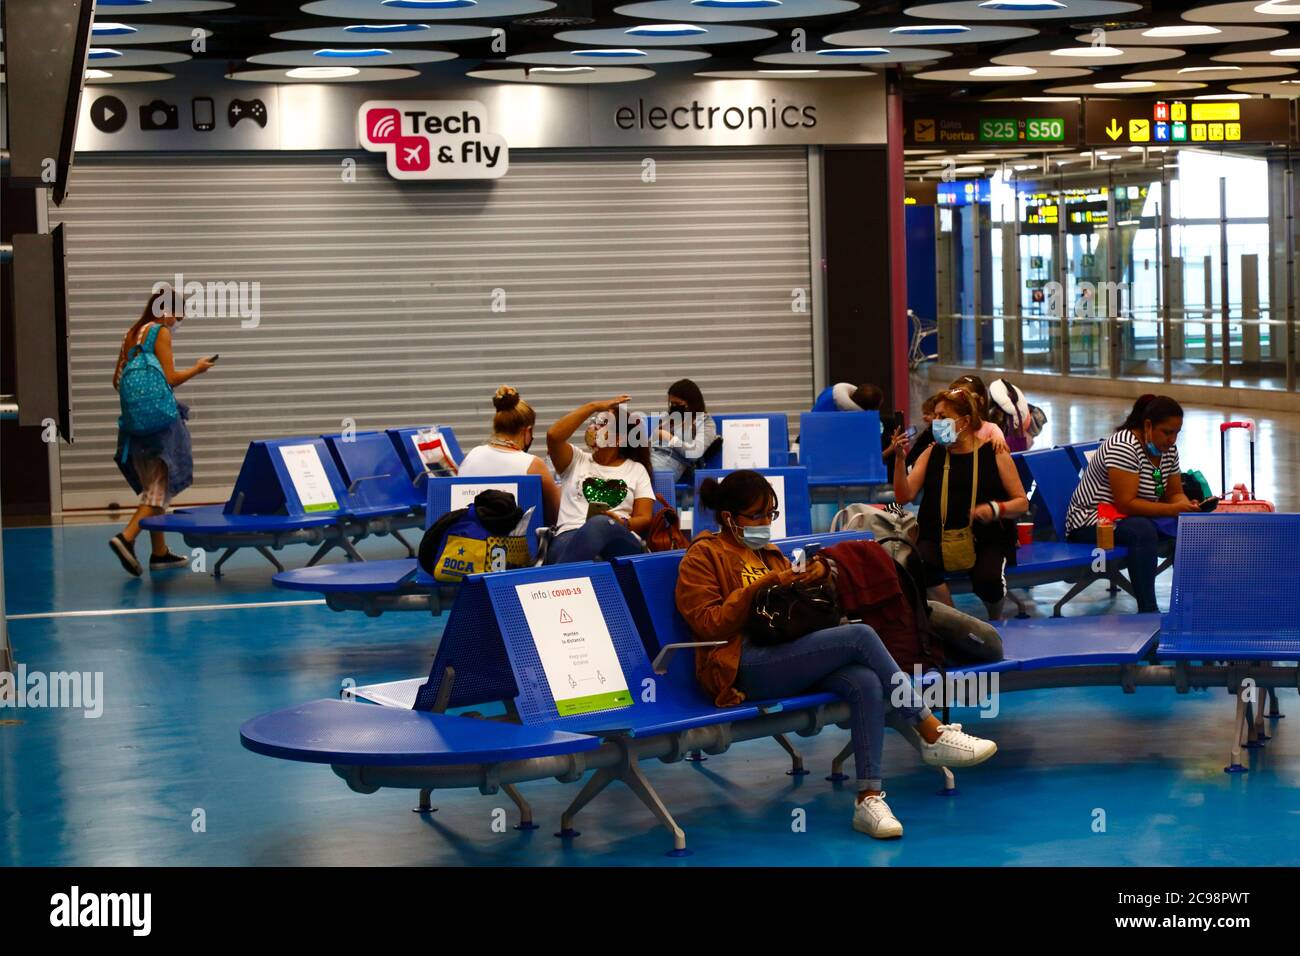 28th July 2020, Barajas Airport, Madrid, Spain: Passengers social distancing in the near empy departure lounge area of the Terminal 4S building of Barajas Airport. Reduced numbers of flights are now operating between European countries after the lockdown to control the covid-19 coronavirus, and governments have put a system of air bridges in place to facilitate travel and tourism. Spain has seen a number of new outbreaks in recent days, prompting the UK government to announce that people returning to the UK from Spain should quarantine for 14 days on arrival. Stock Photo